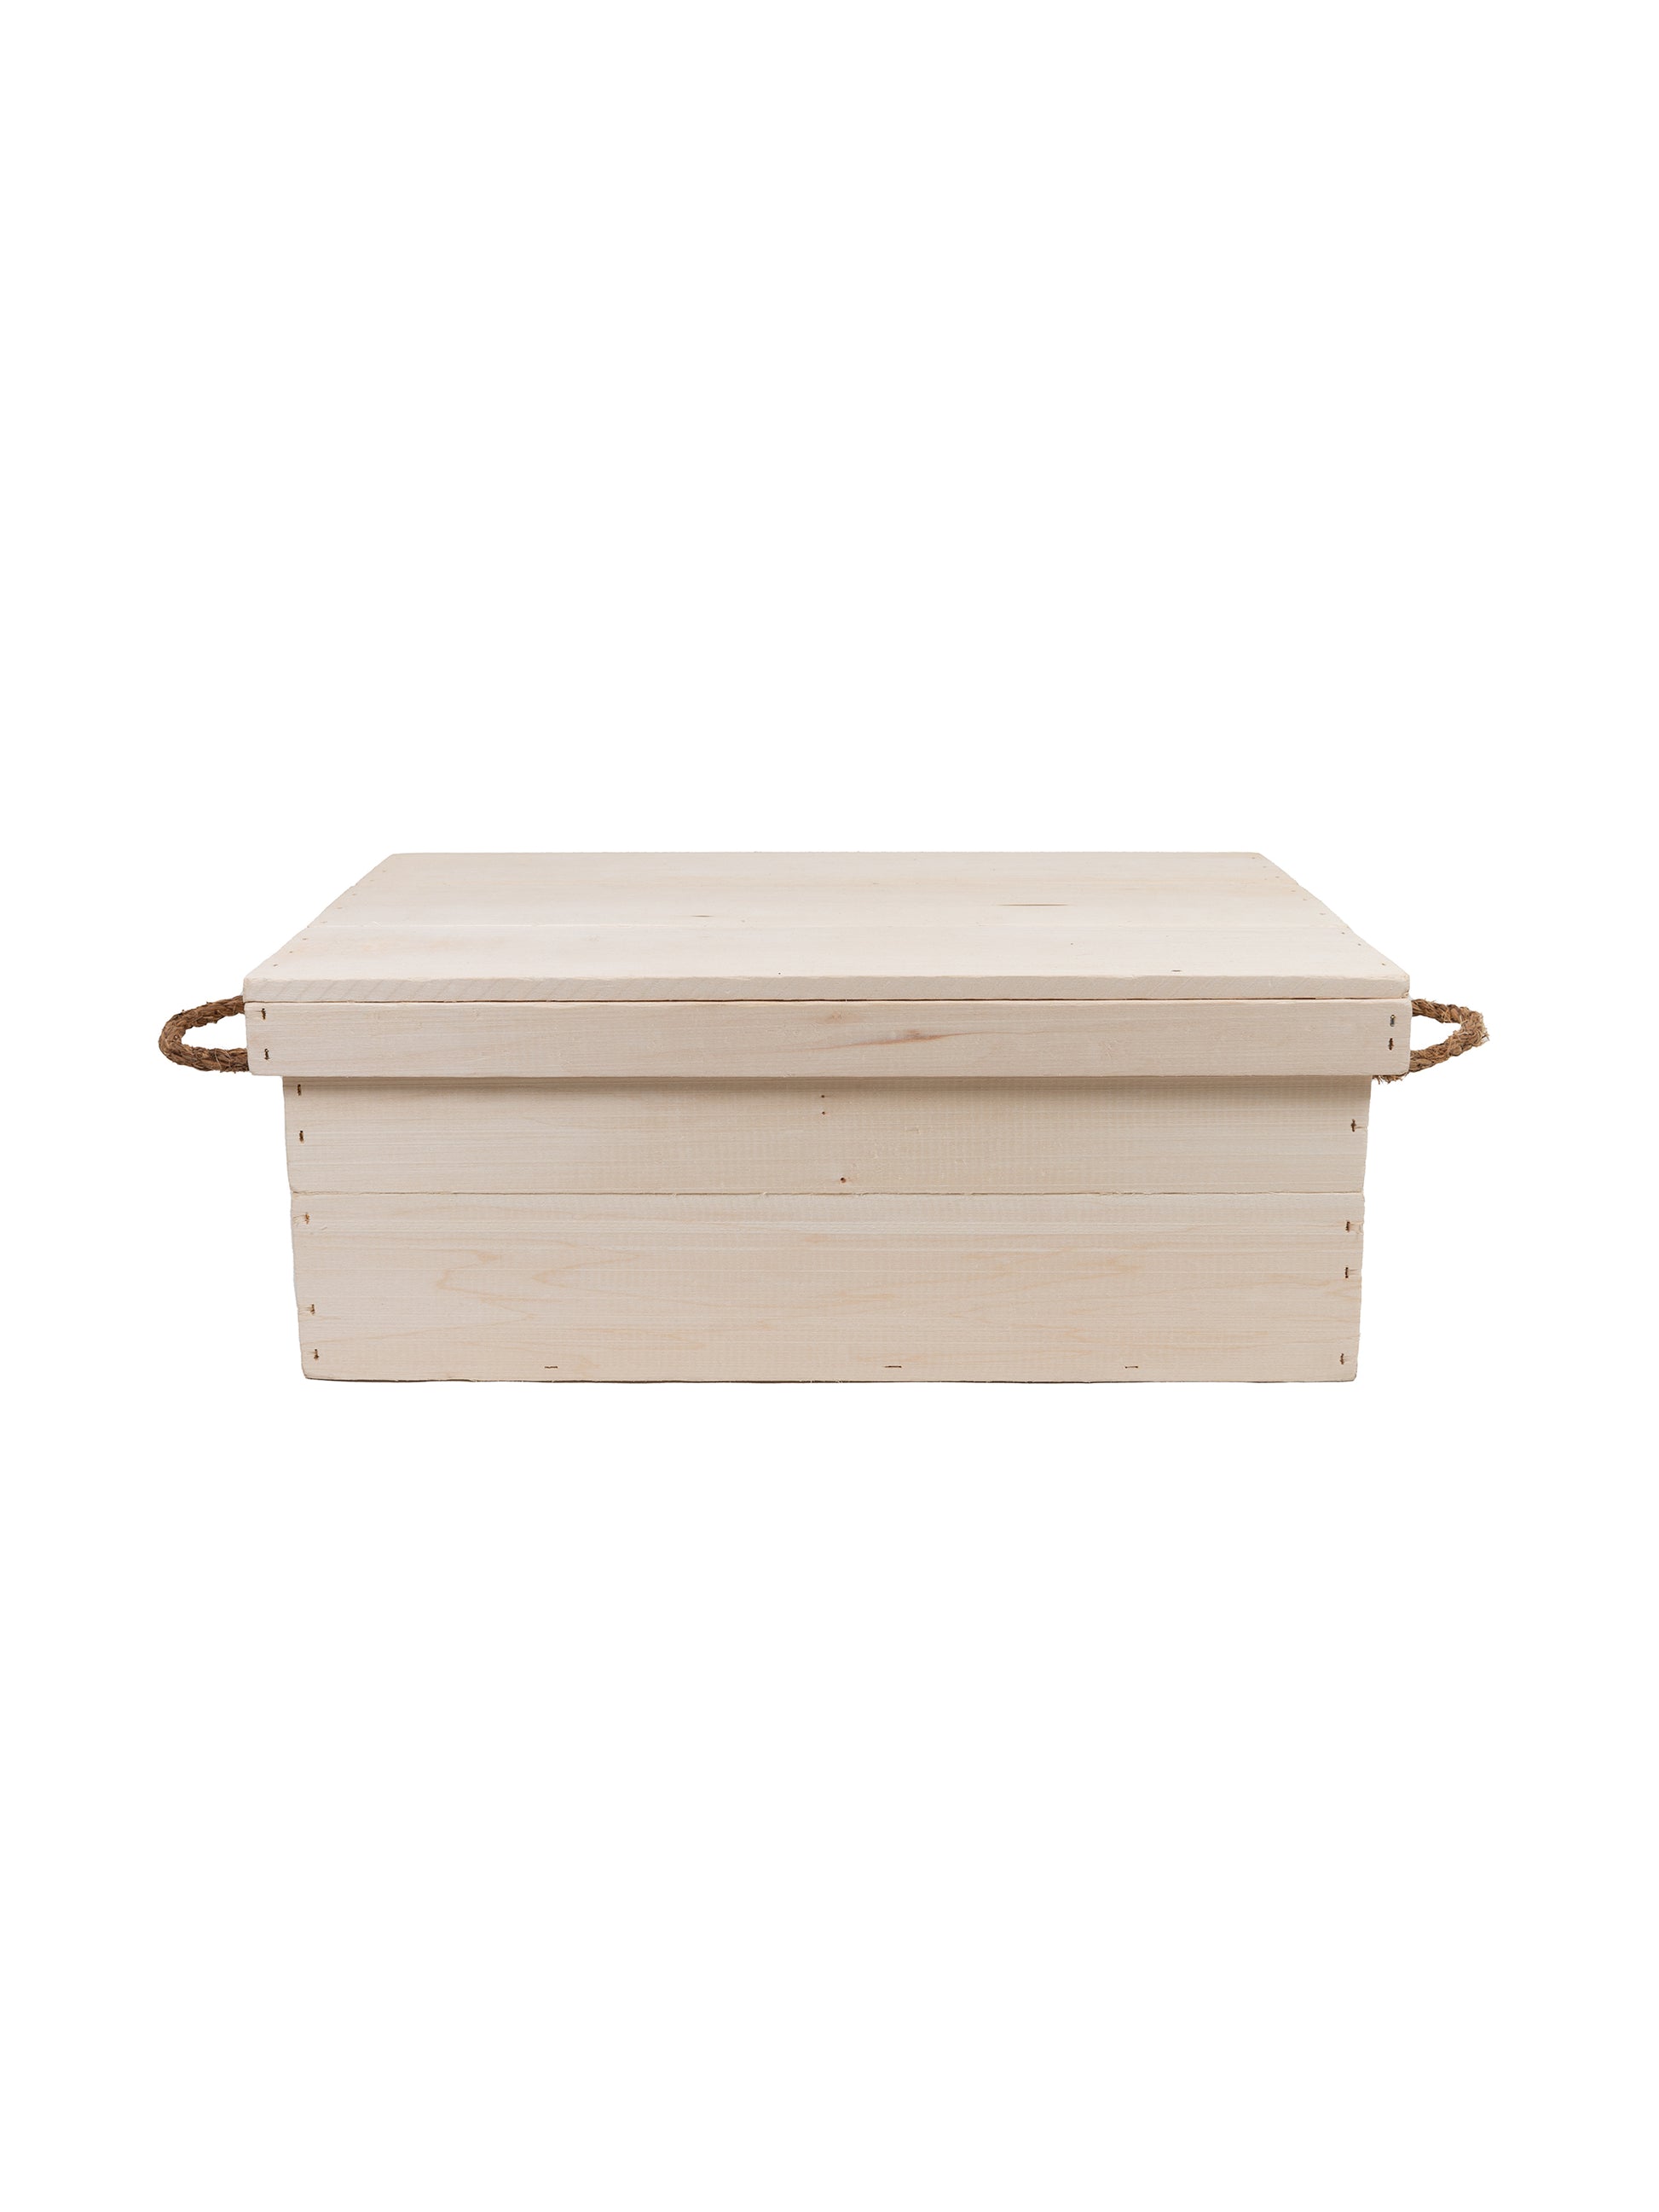 WT Wooden Gift Box with Rope Handles Weston Table